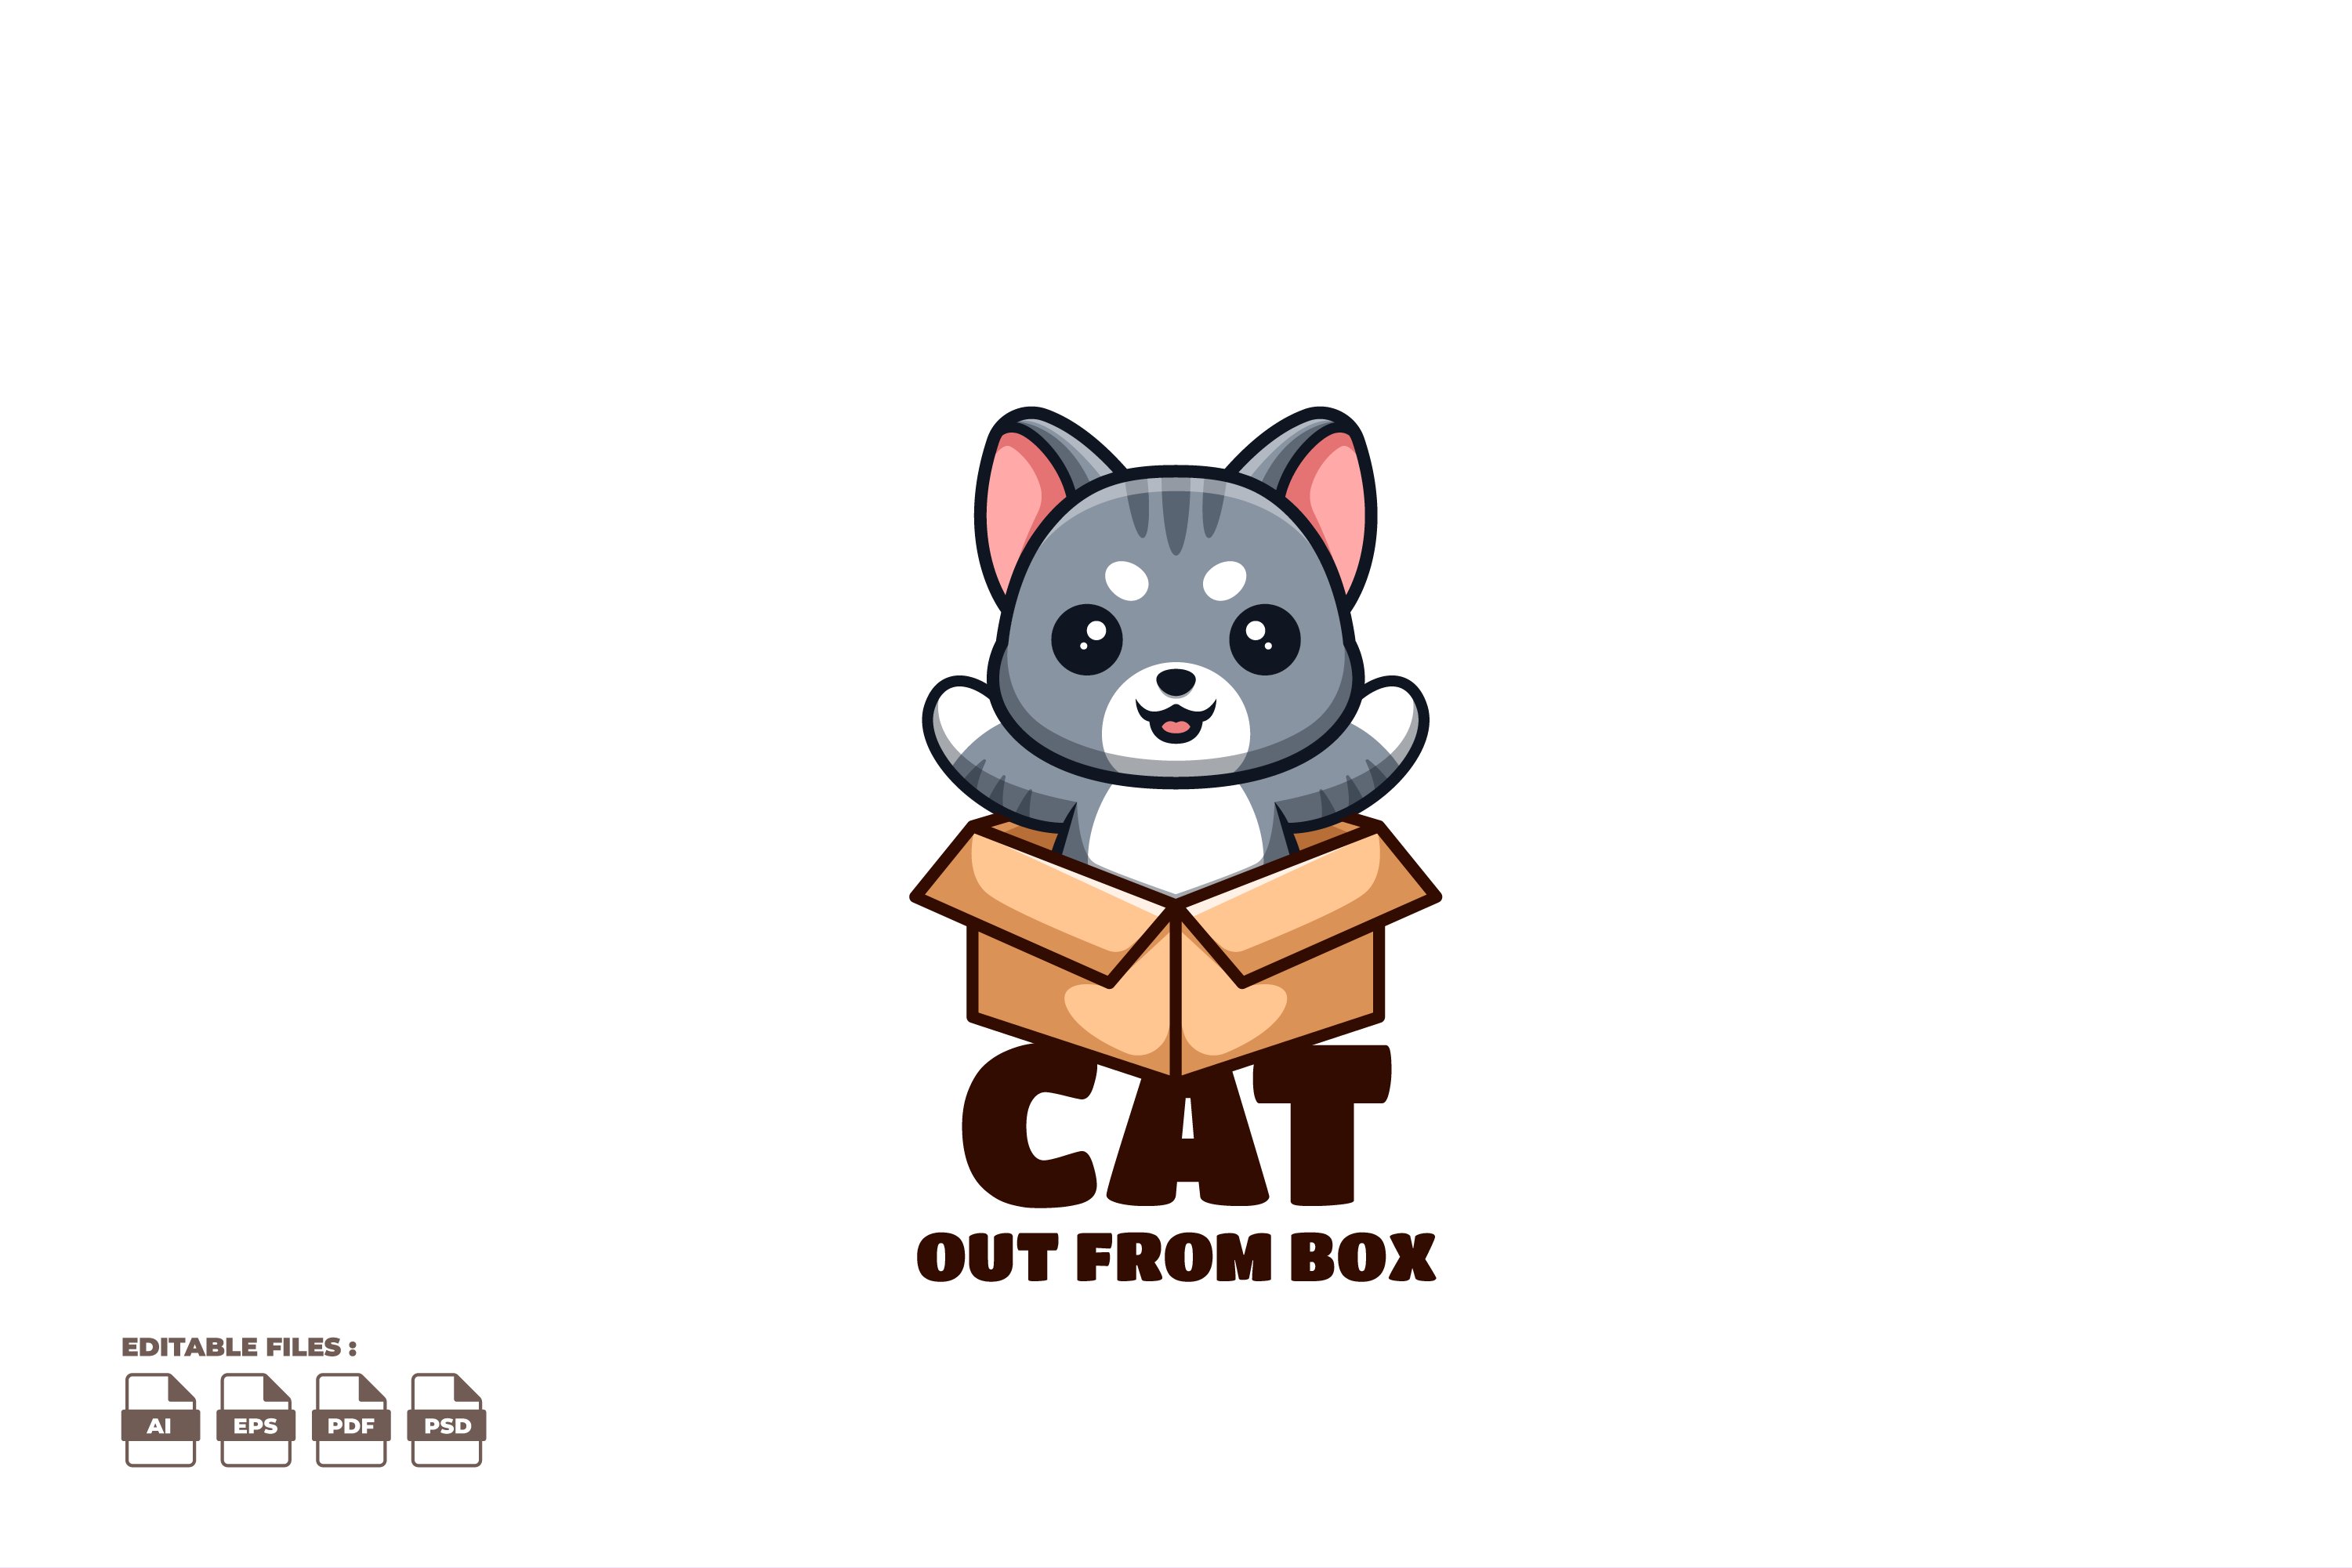 Out From Box Domestic Cat Cute Masco cover image.